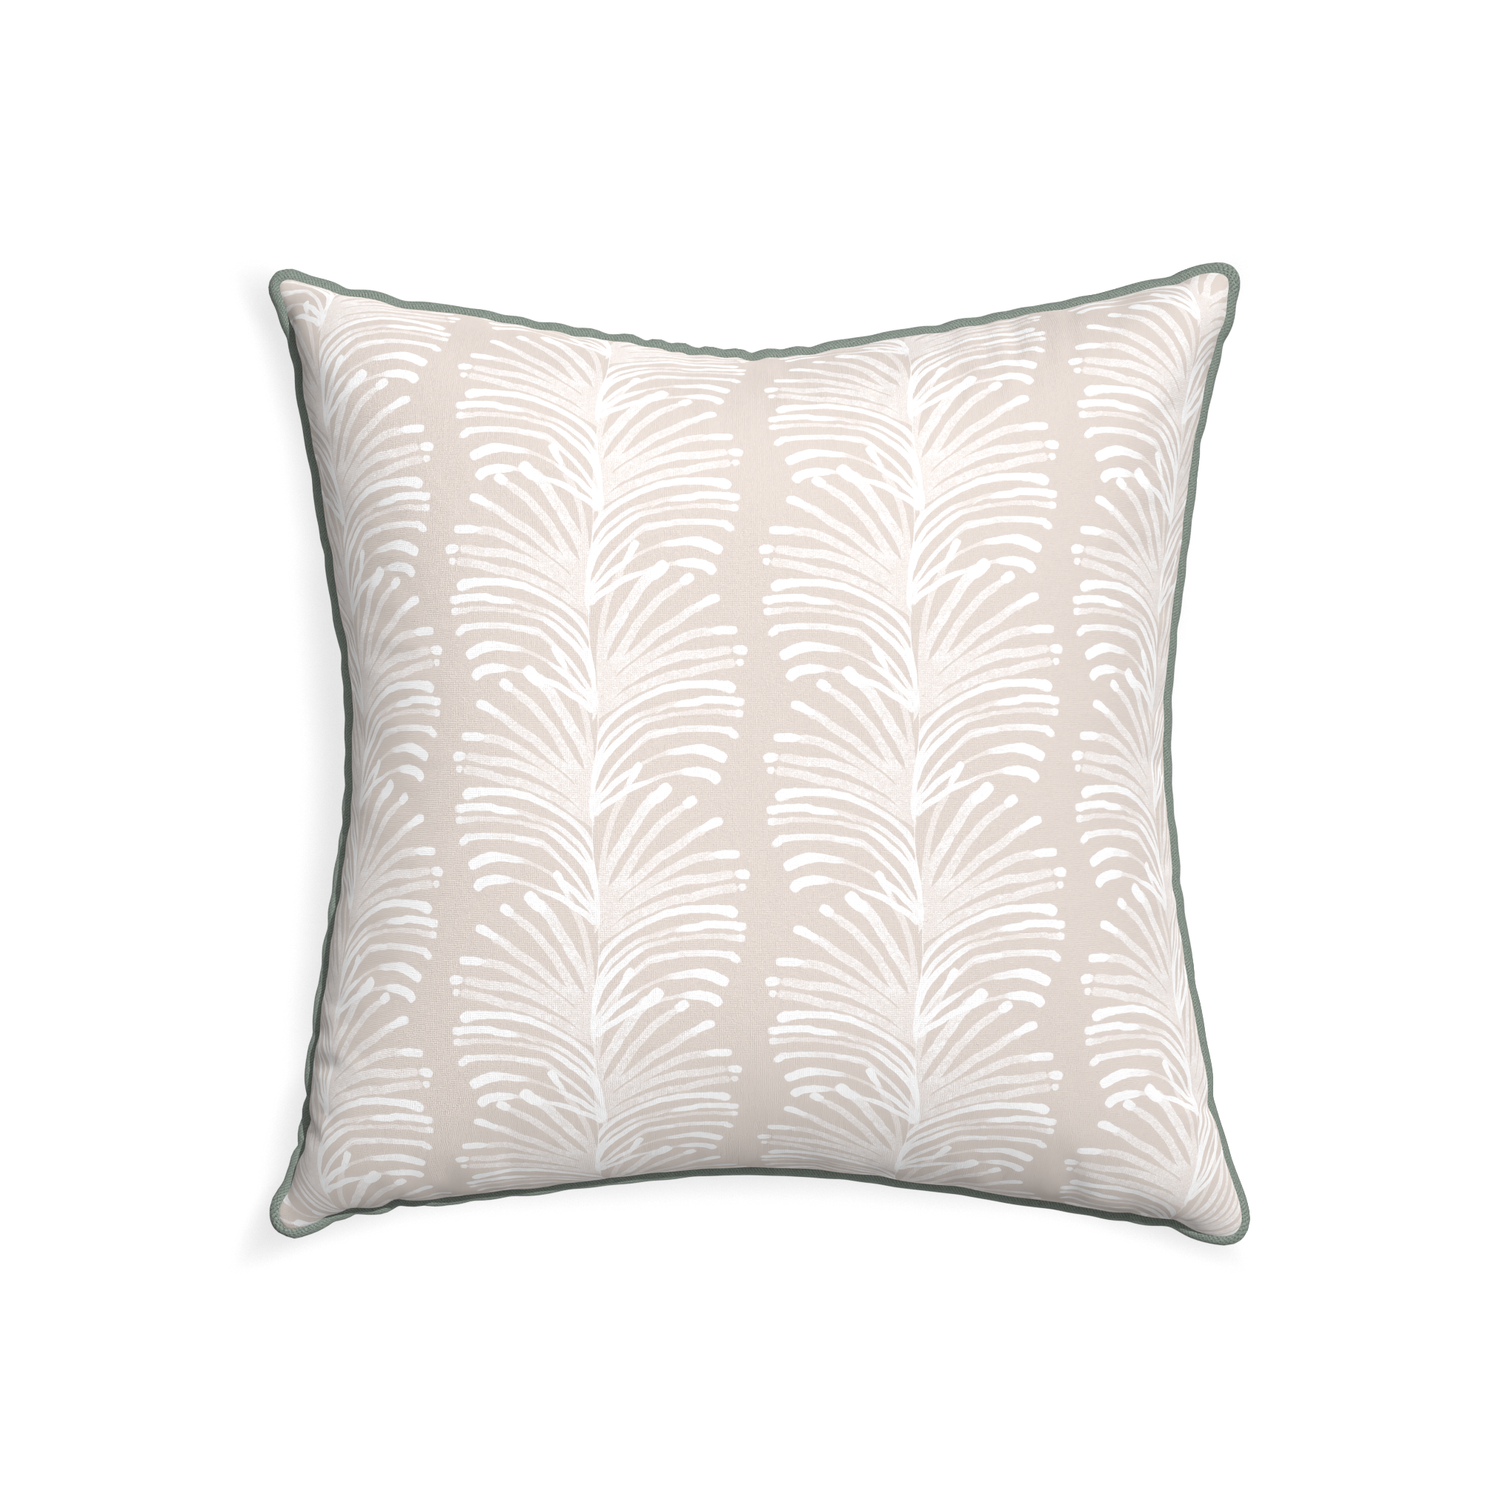 22-square emma sand custom sand colored botanical stripepillow with sage piping on white background